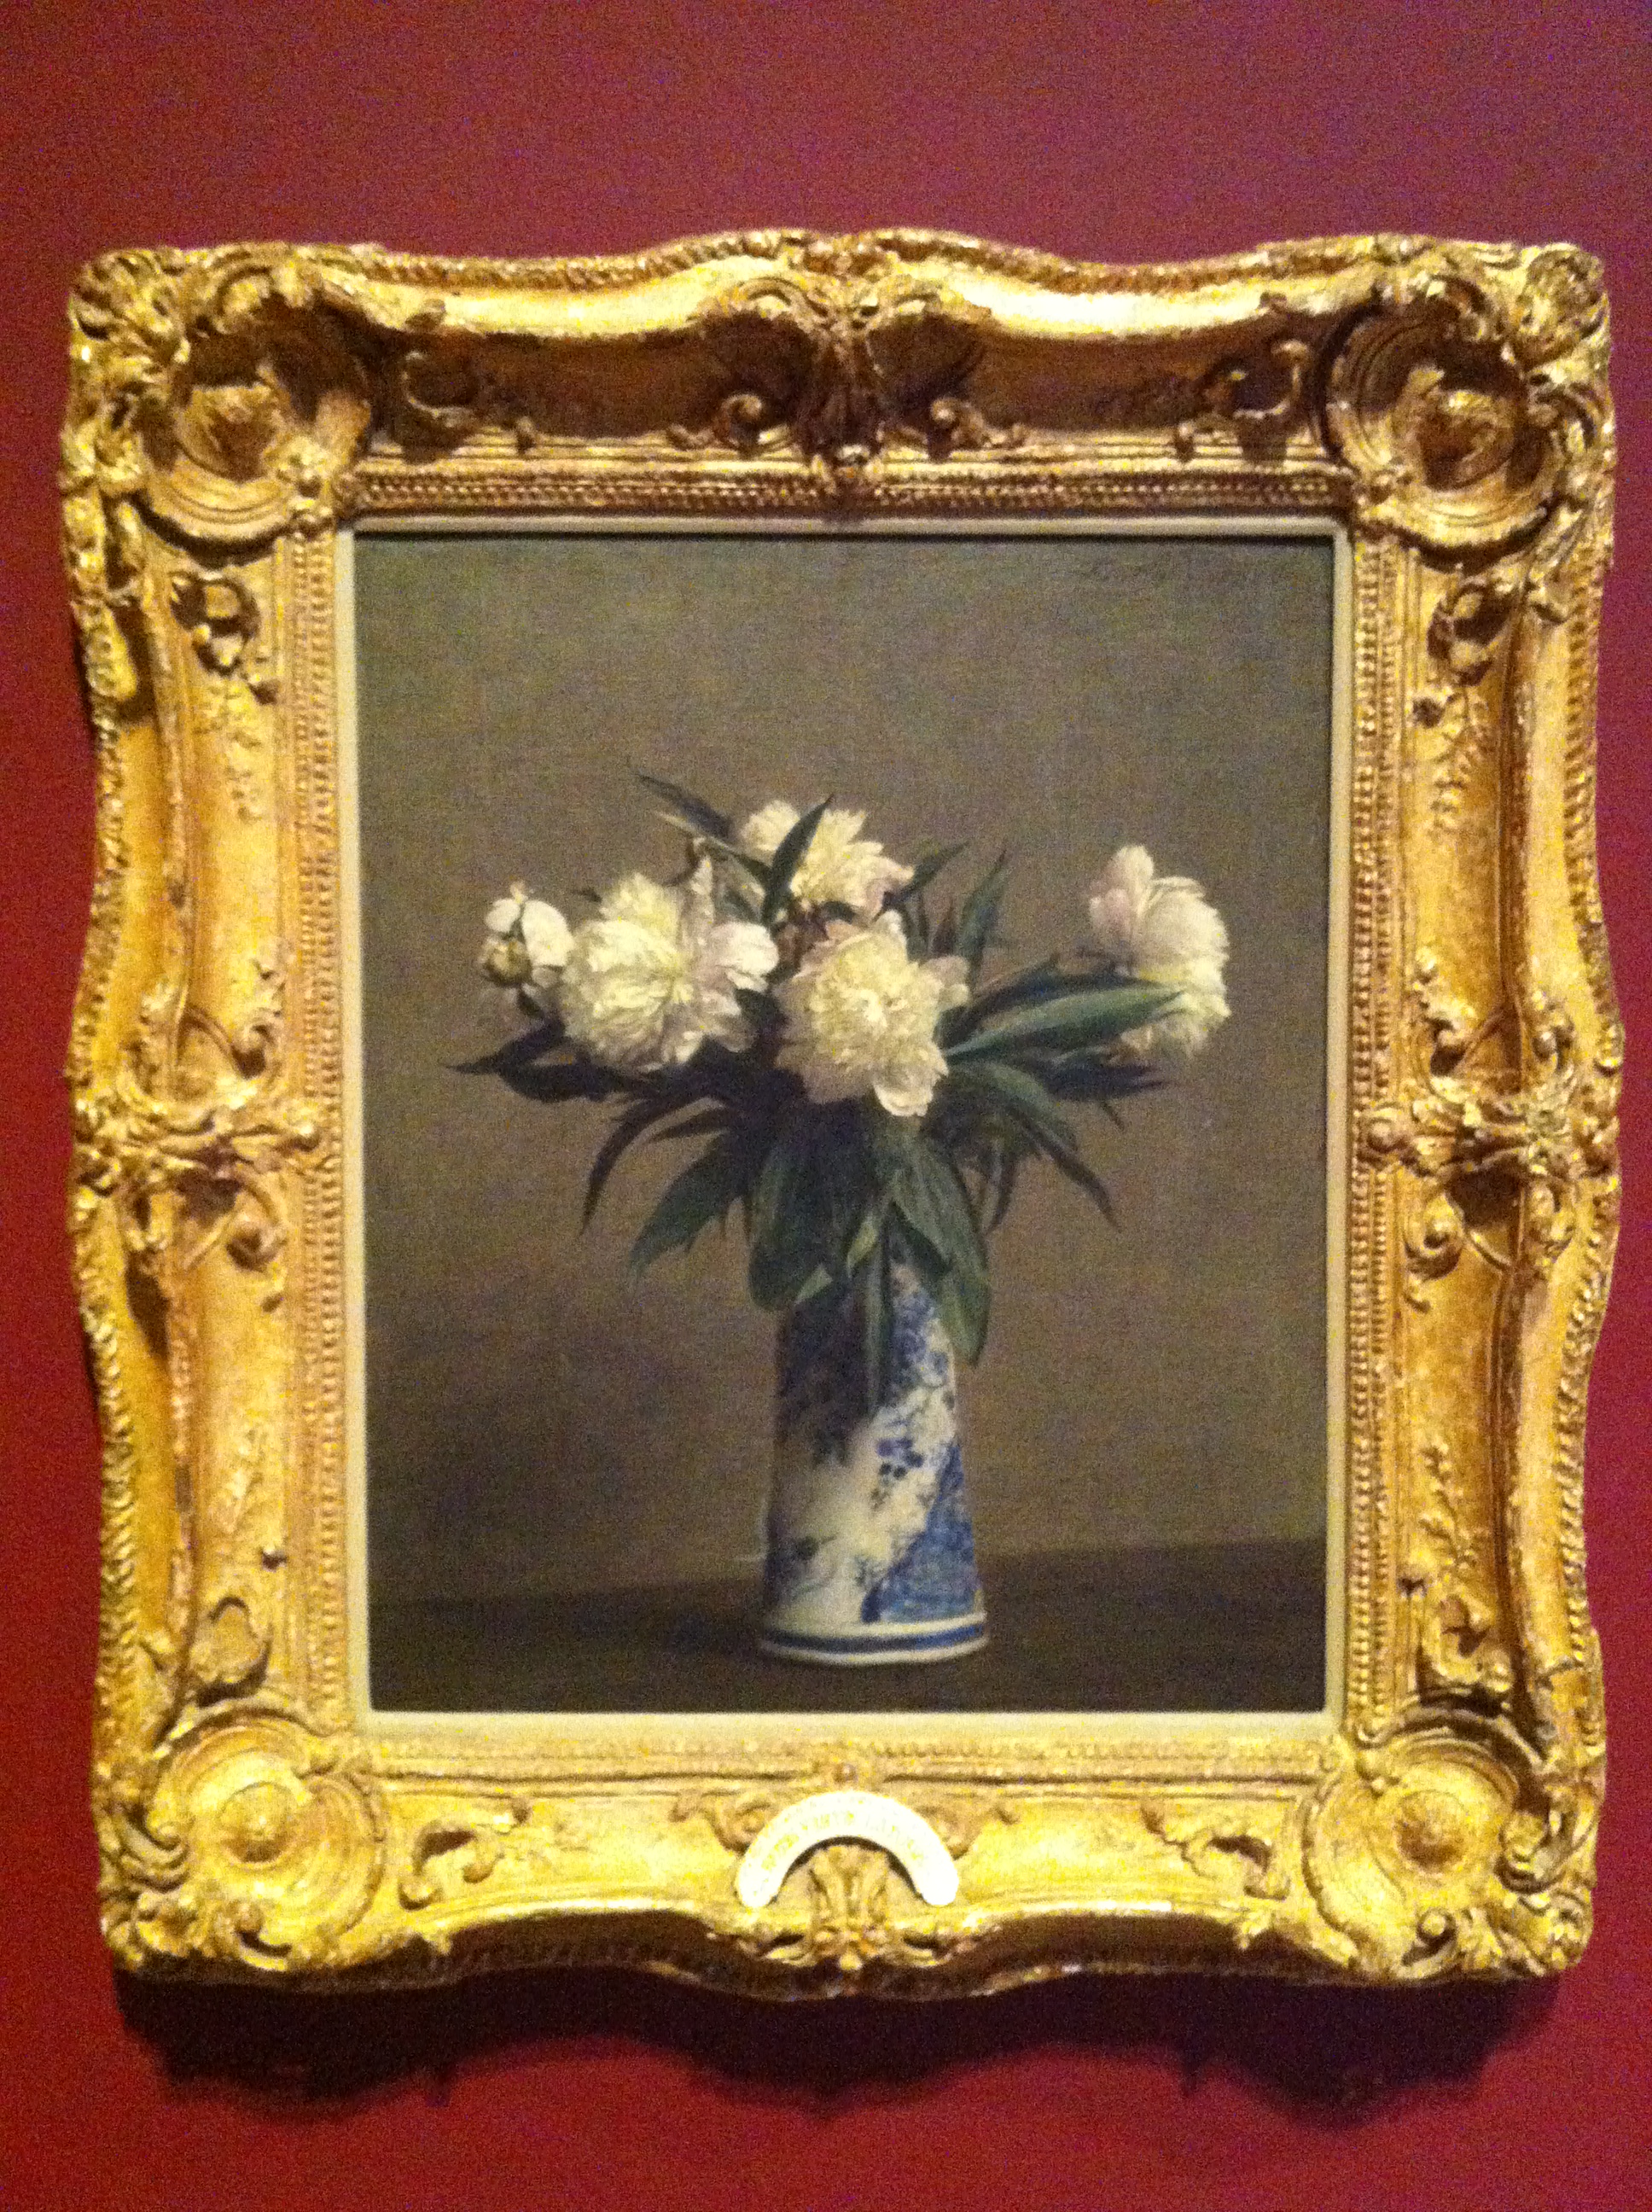 Fantin-Latour Peonies in a Blue and White Vase